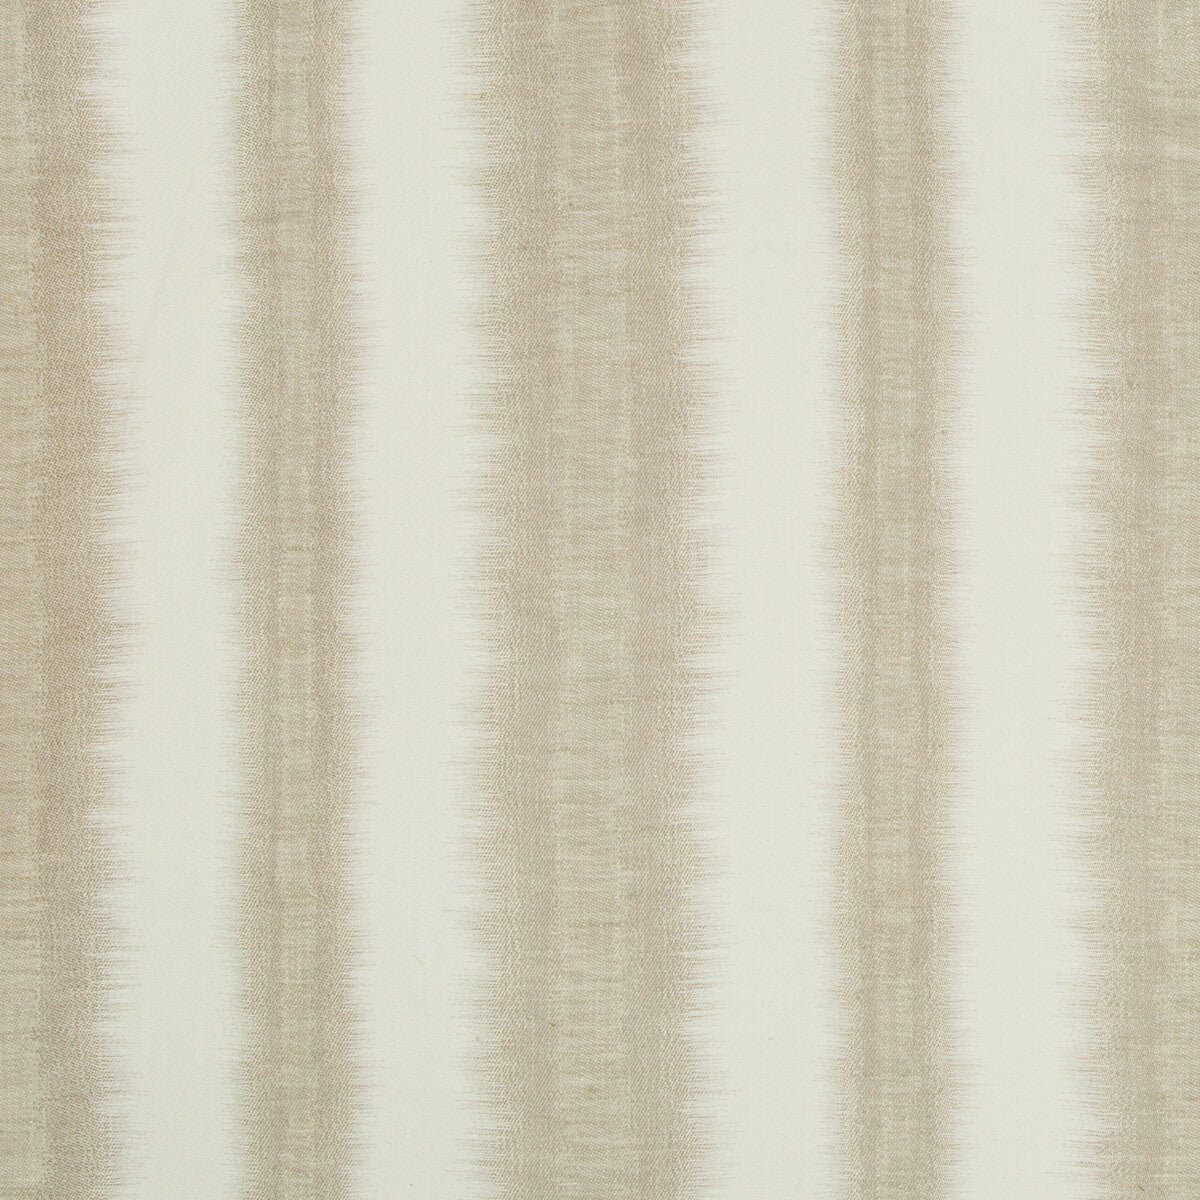 Windswell fabric in linen color - pattern 34979.16.0 - by Kravet Basics in the Jeffrey Alan Marks Oceanview collection